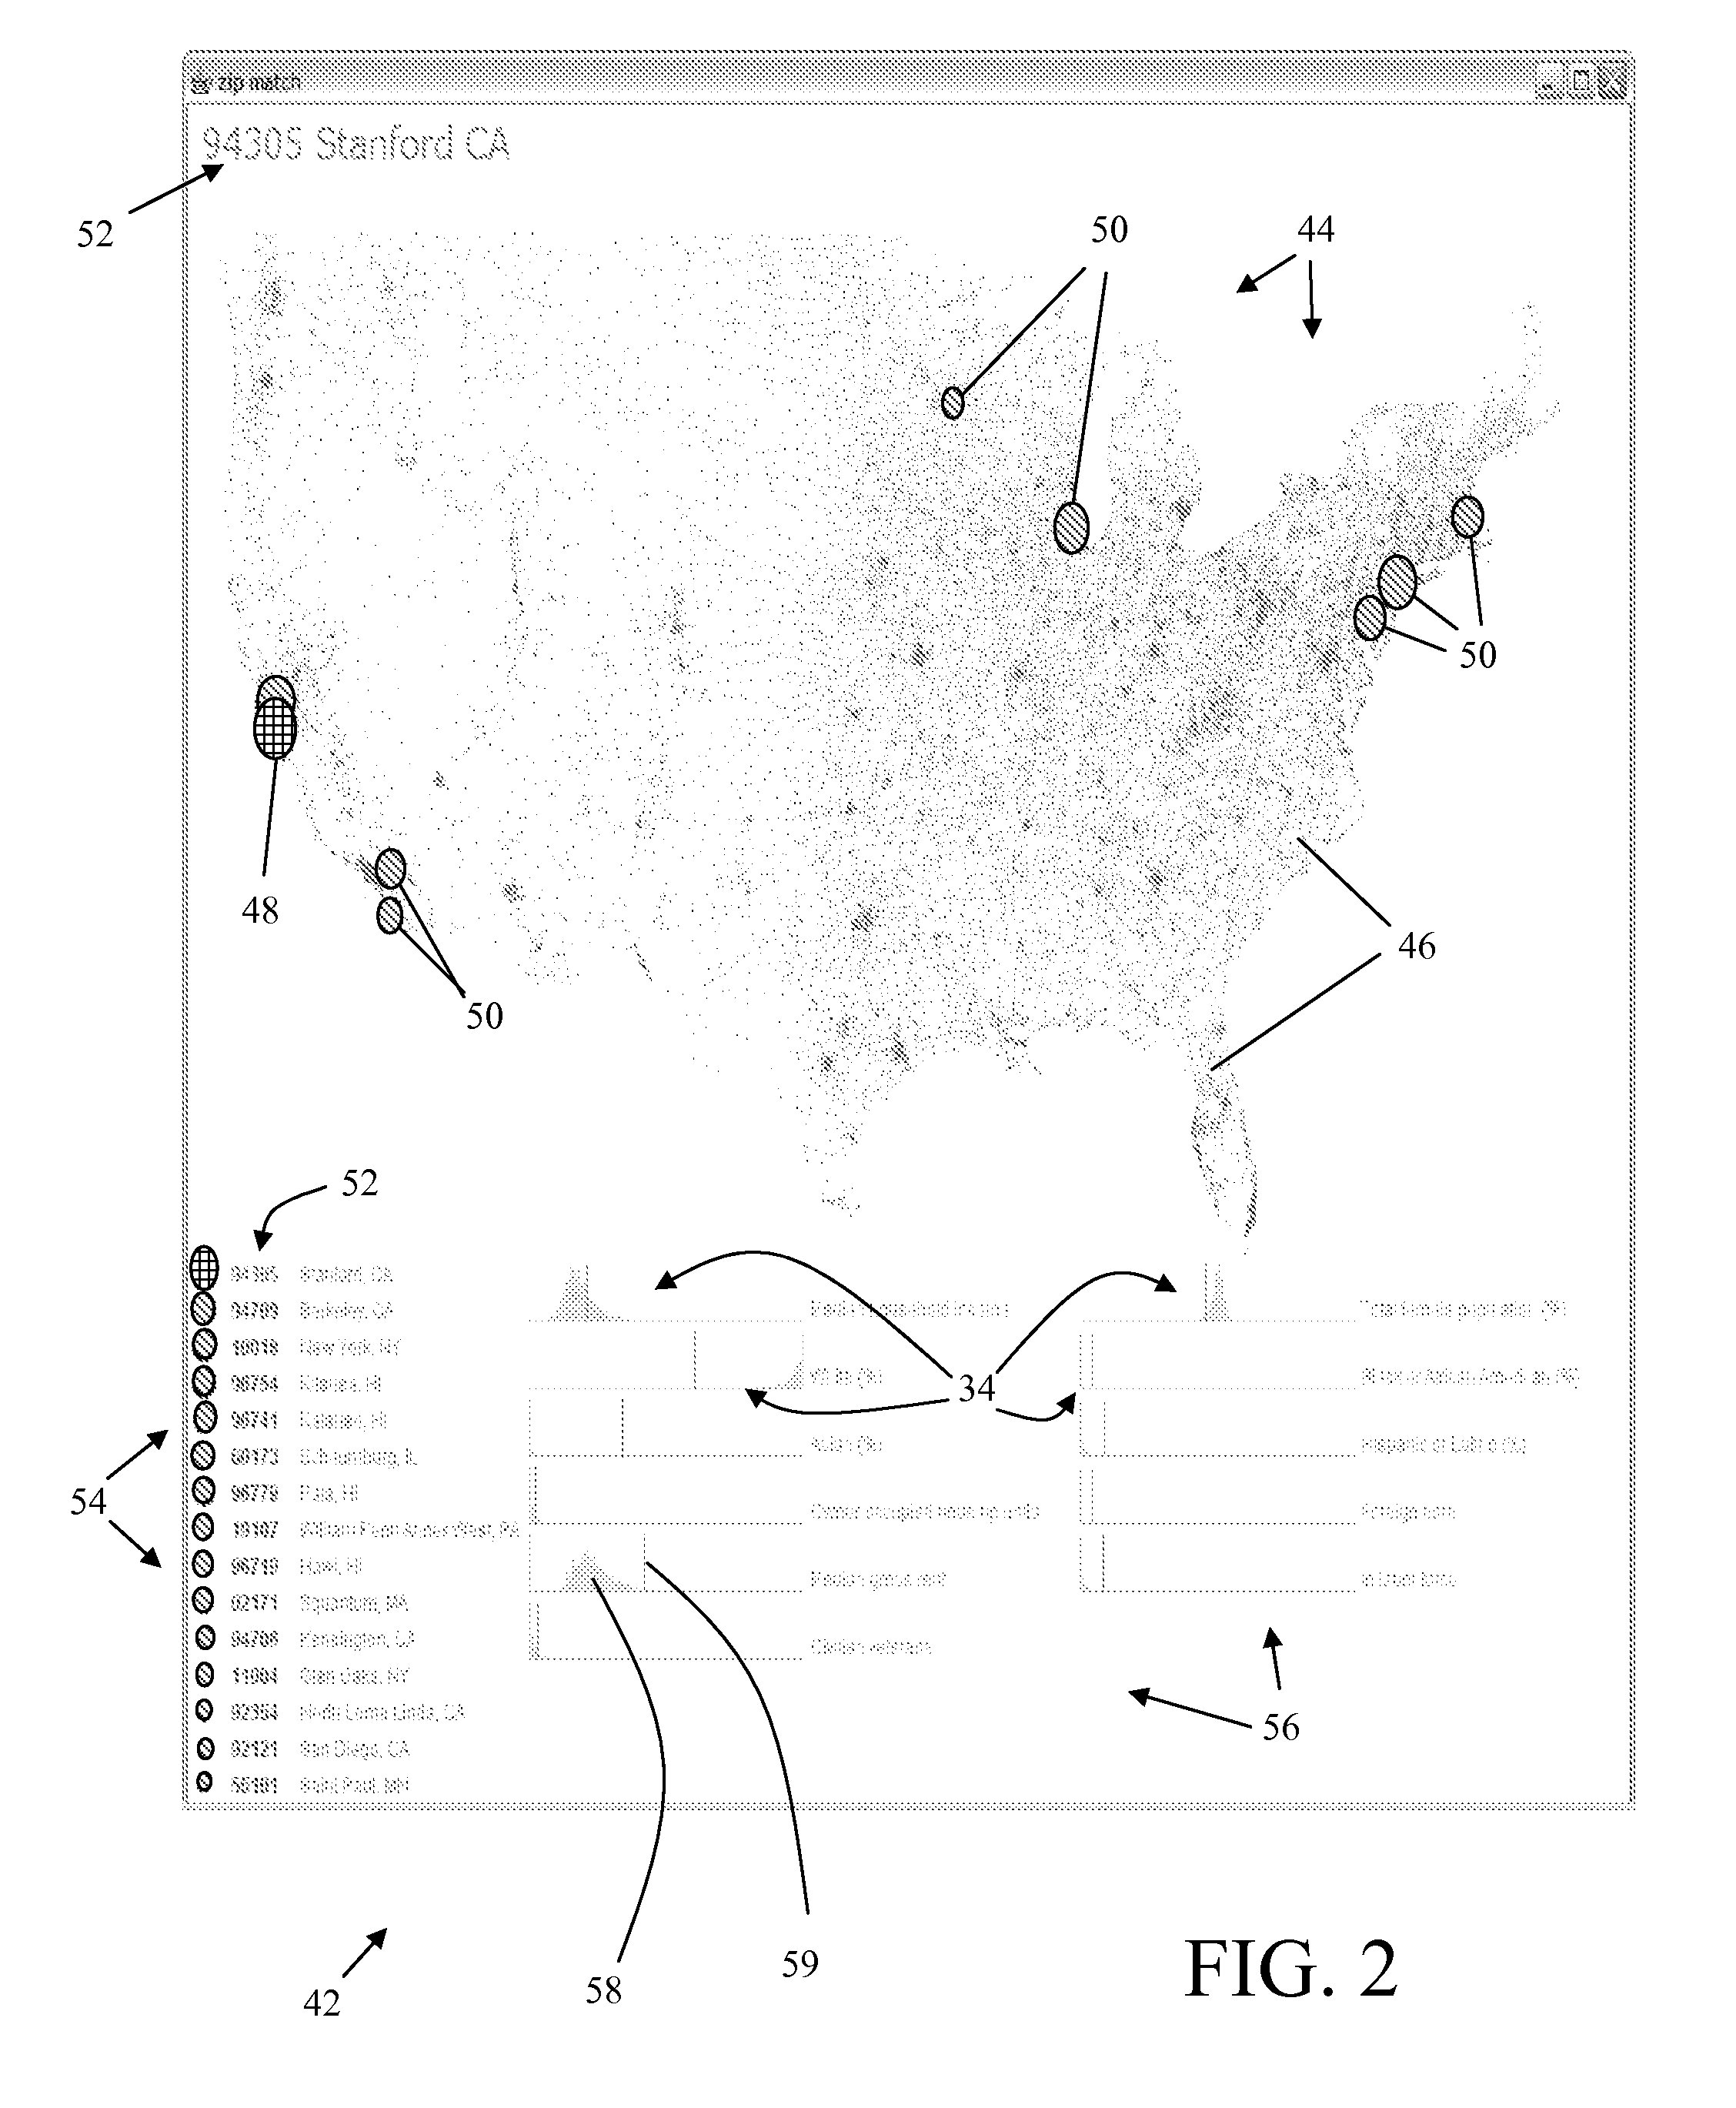 System and method for visually analyzing geographic data